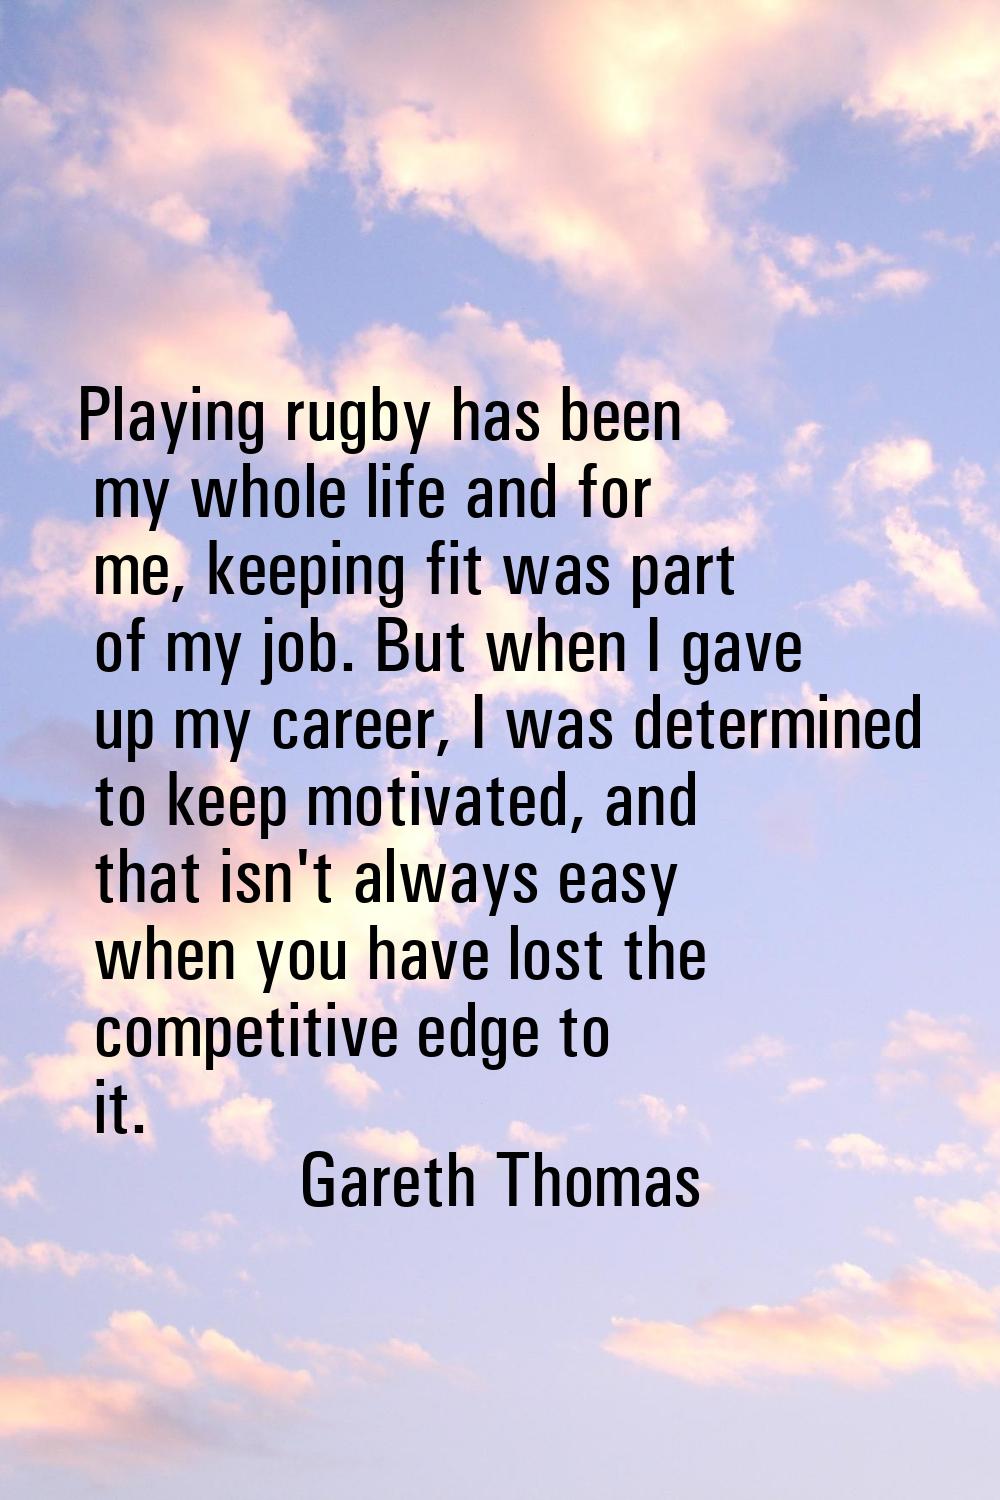 Playing rugby has been my whole life and for me, keeping fit was part of my job. But when I gave up